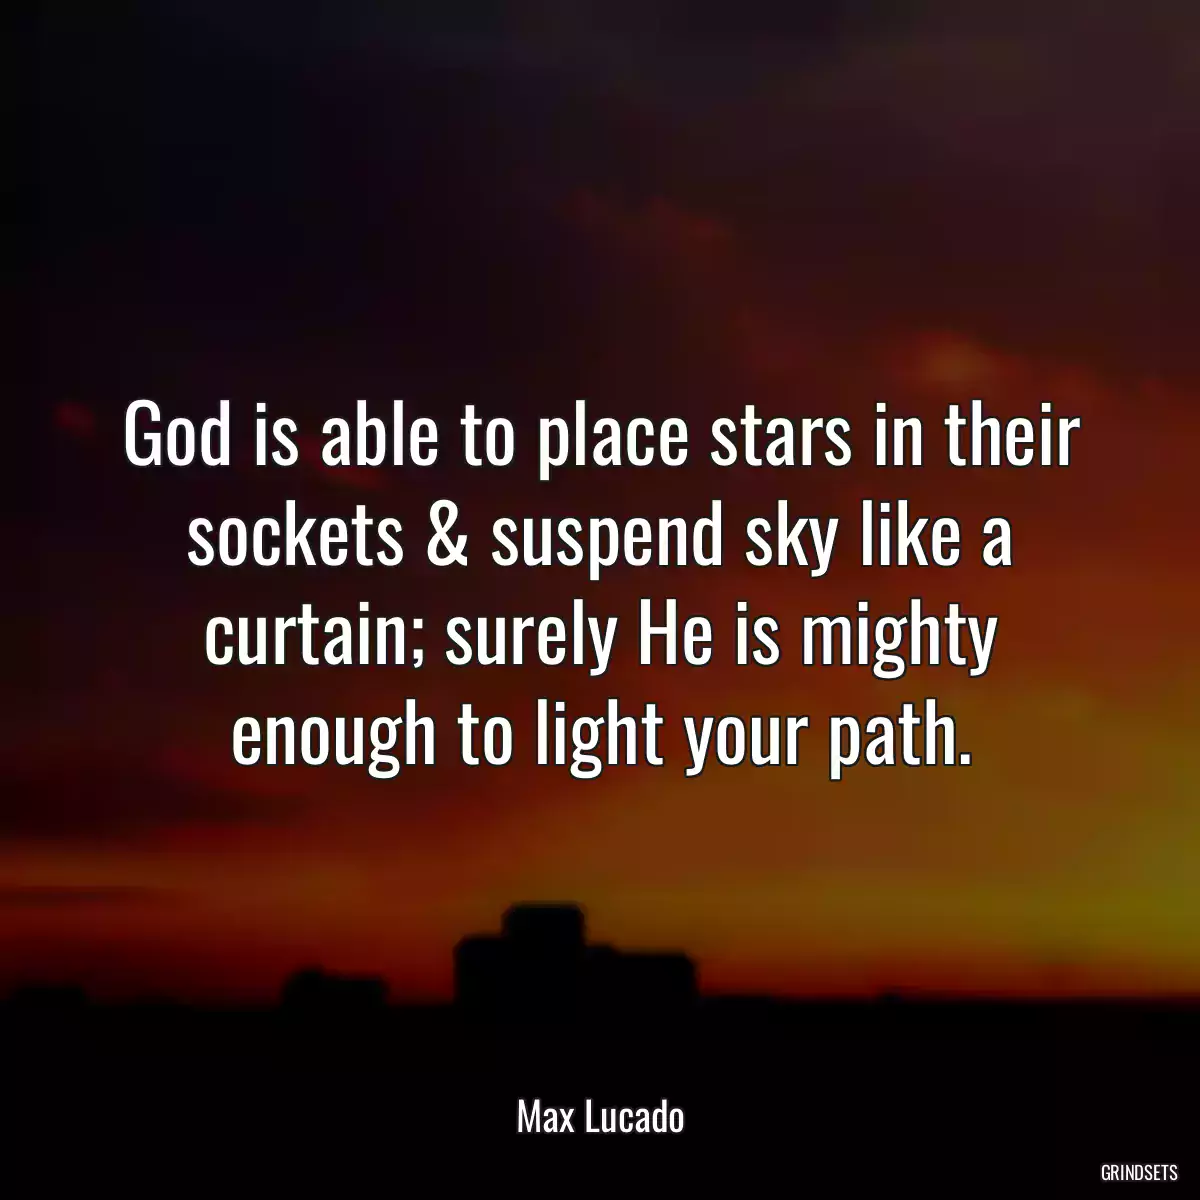 God is able to place stars in their sockets & suspend sky like a curtain; surely He is mighty enough to light your path.